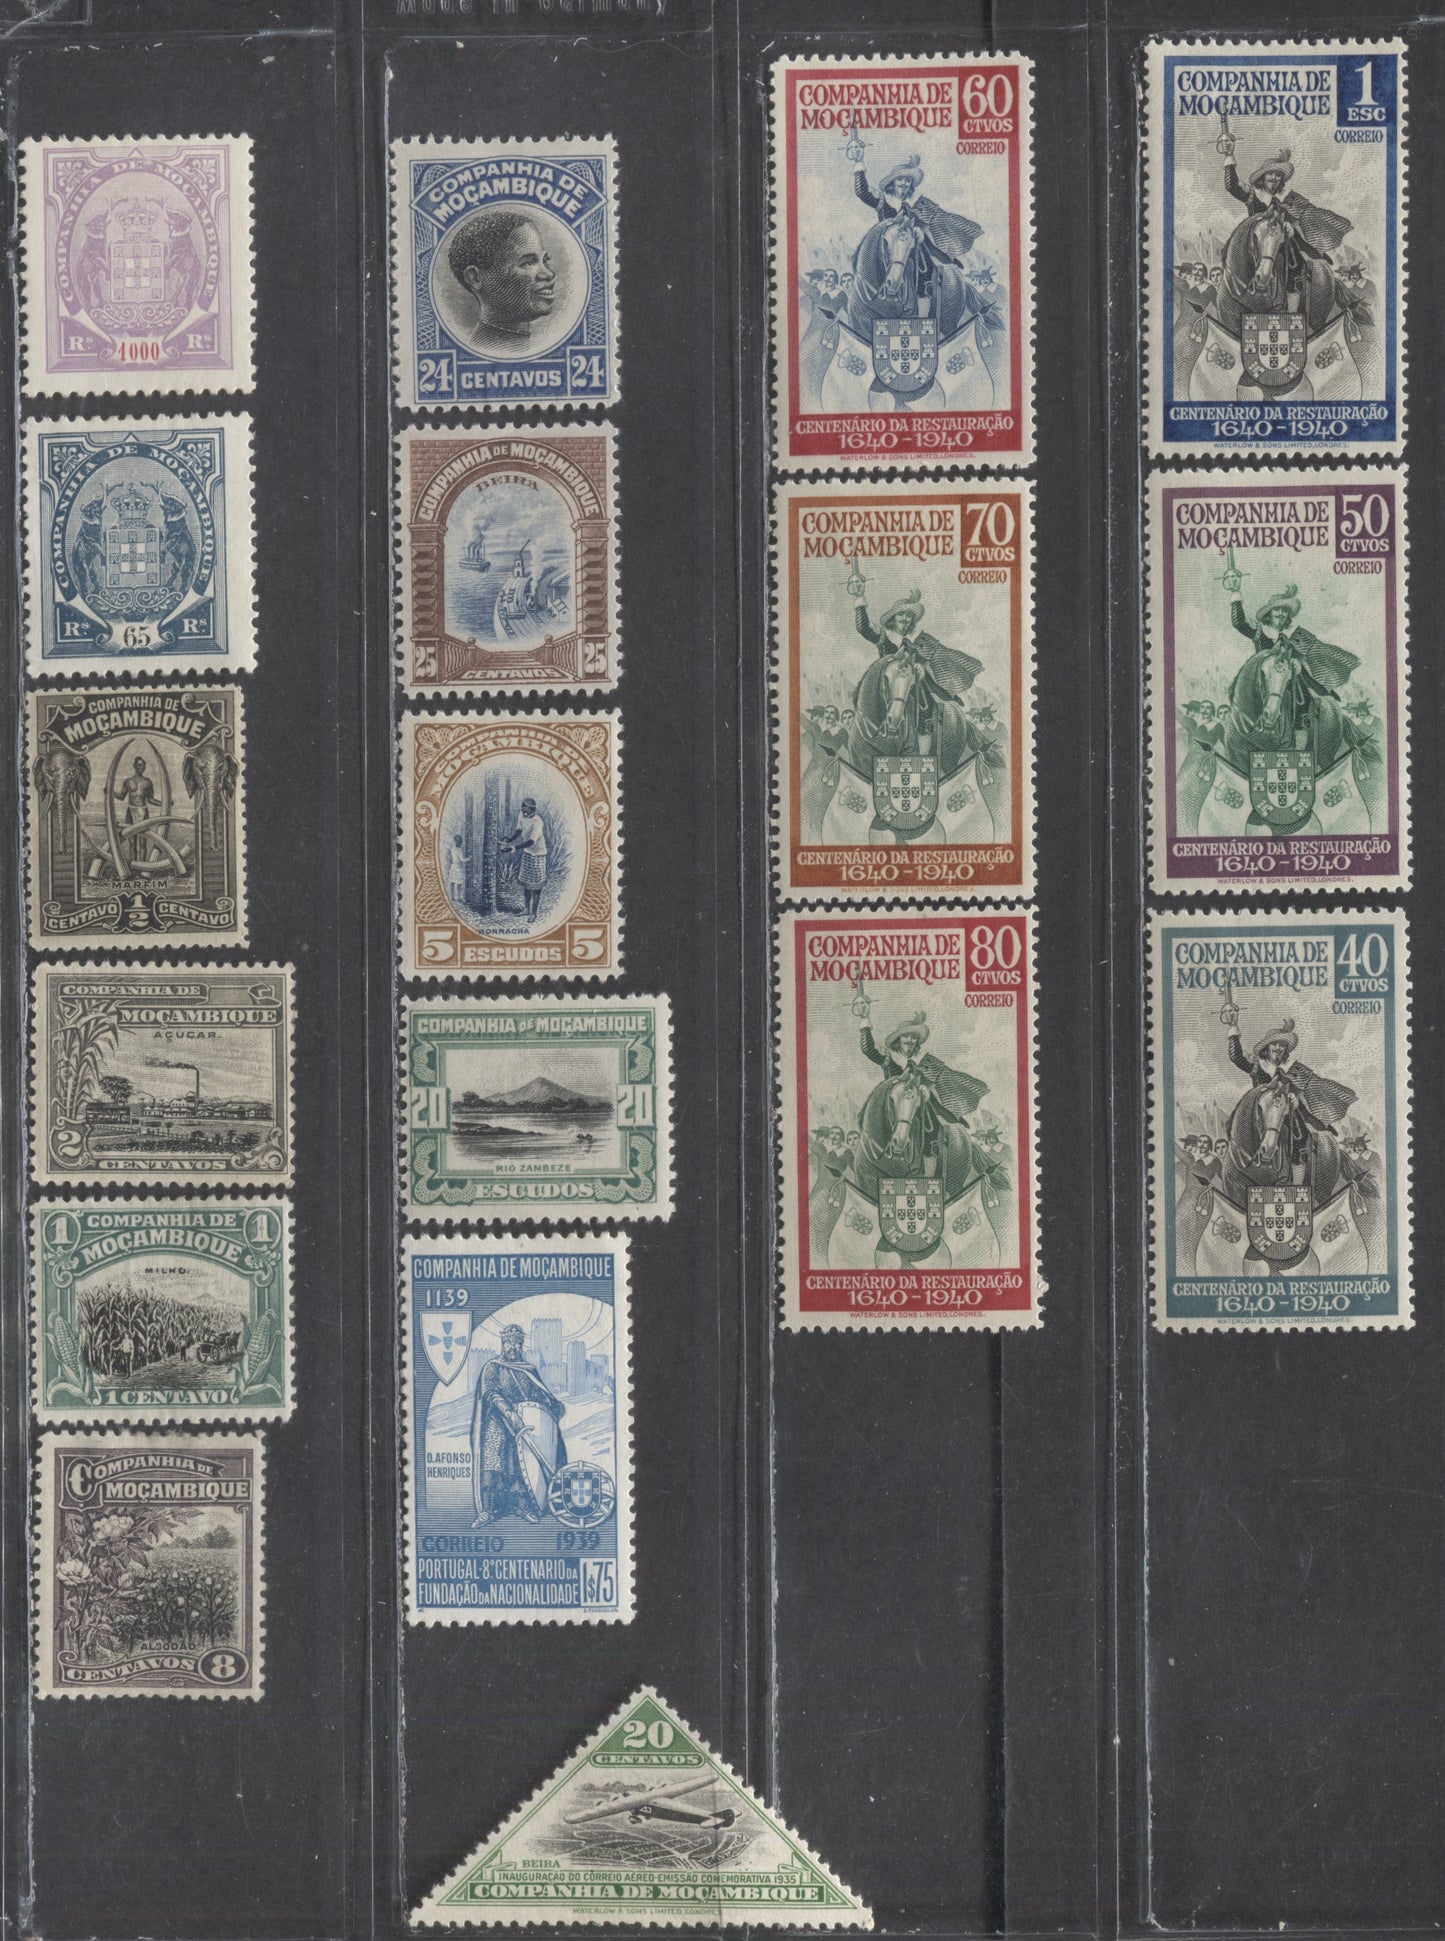 Lot 514 Mozambique Company SC#24/207 1895-1940 Definitives & Commemoratives, 18 F/VFOG Singles, Click on Listing to See ALL Pictures, 2022 Scott Classic Cat. $26.55 USD